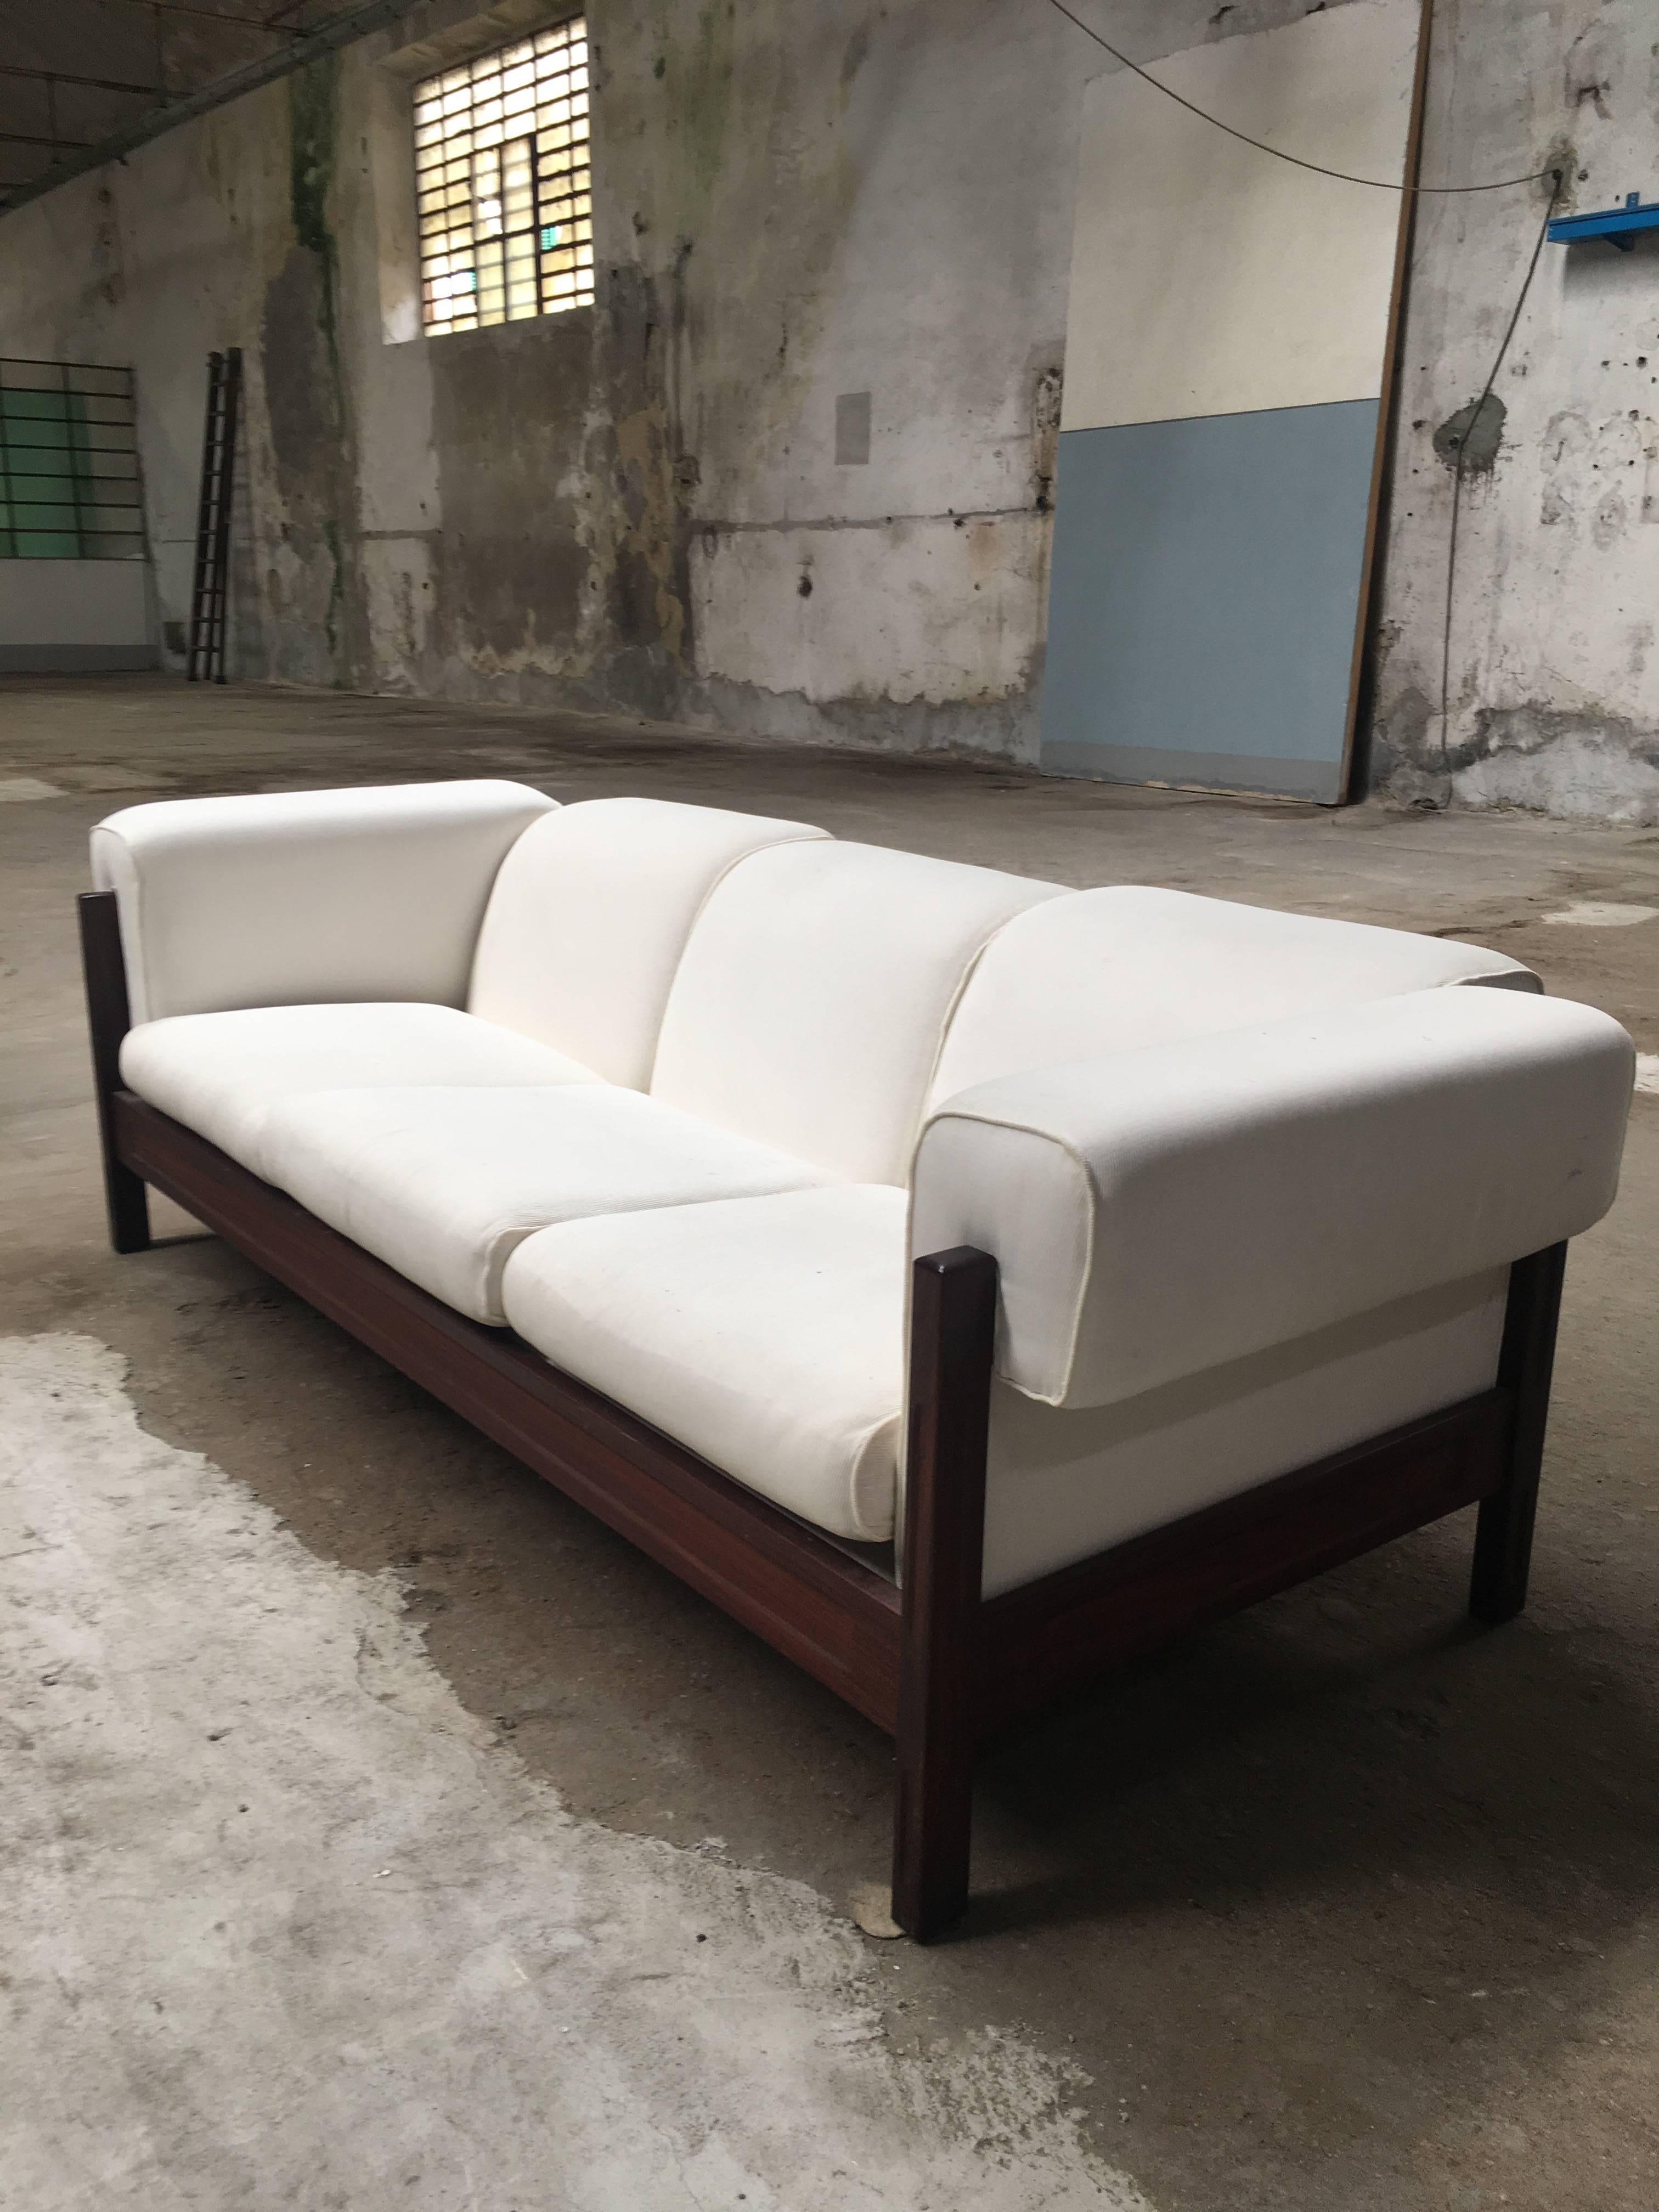 Late 20th Century Mid-Century Modern Italian Living Room Set Composed of Sofa and Armchairs